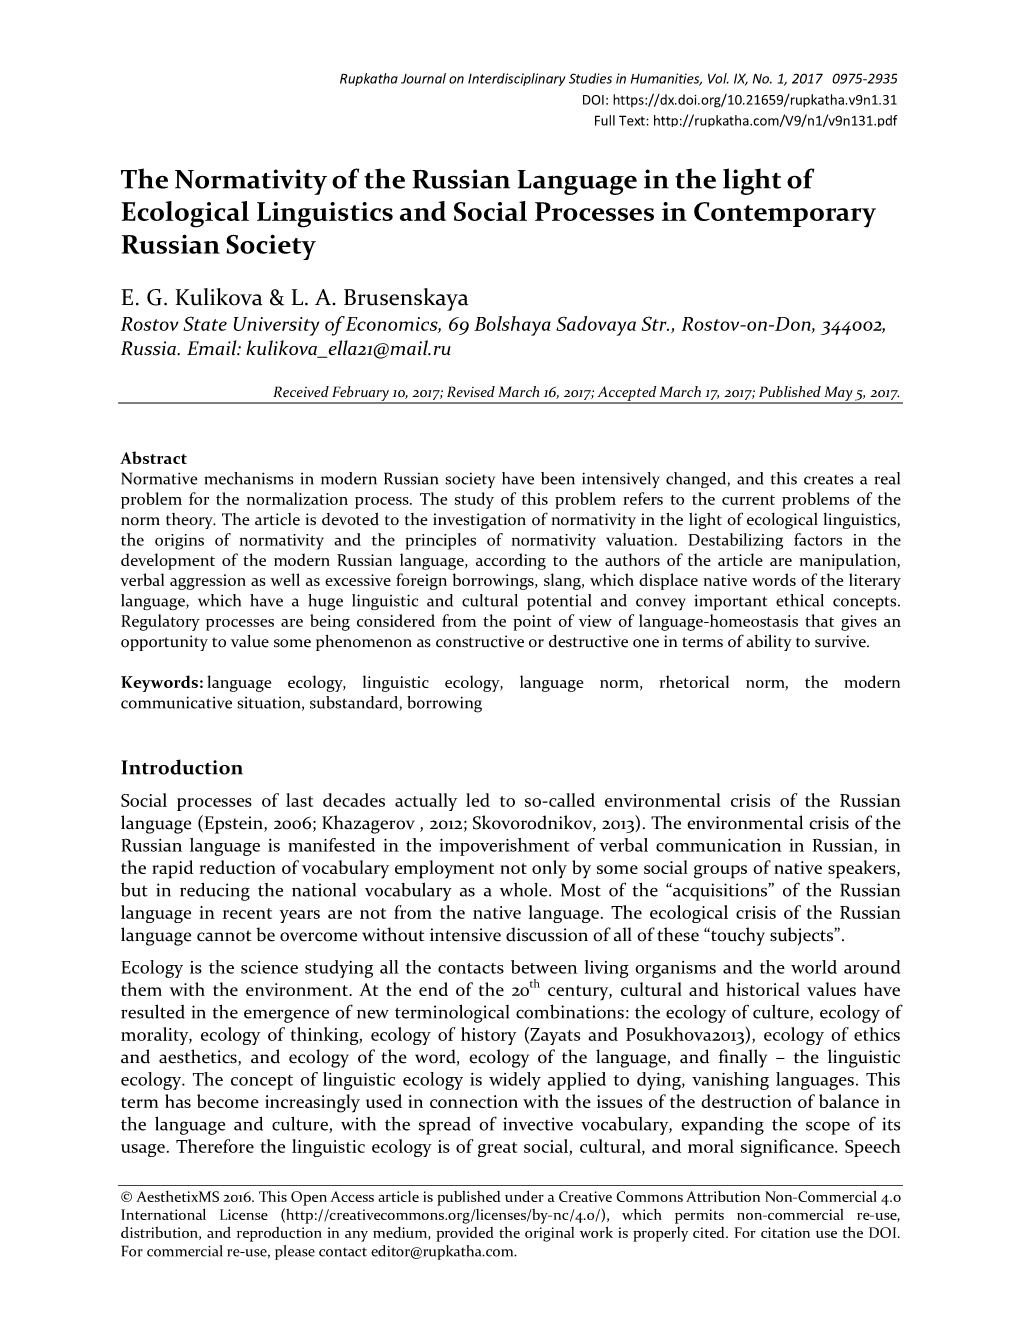 The Normativity of the Russian Language in the Light of Ecological Linguistics and Social Processes in Contemporary Russian Society